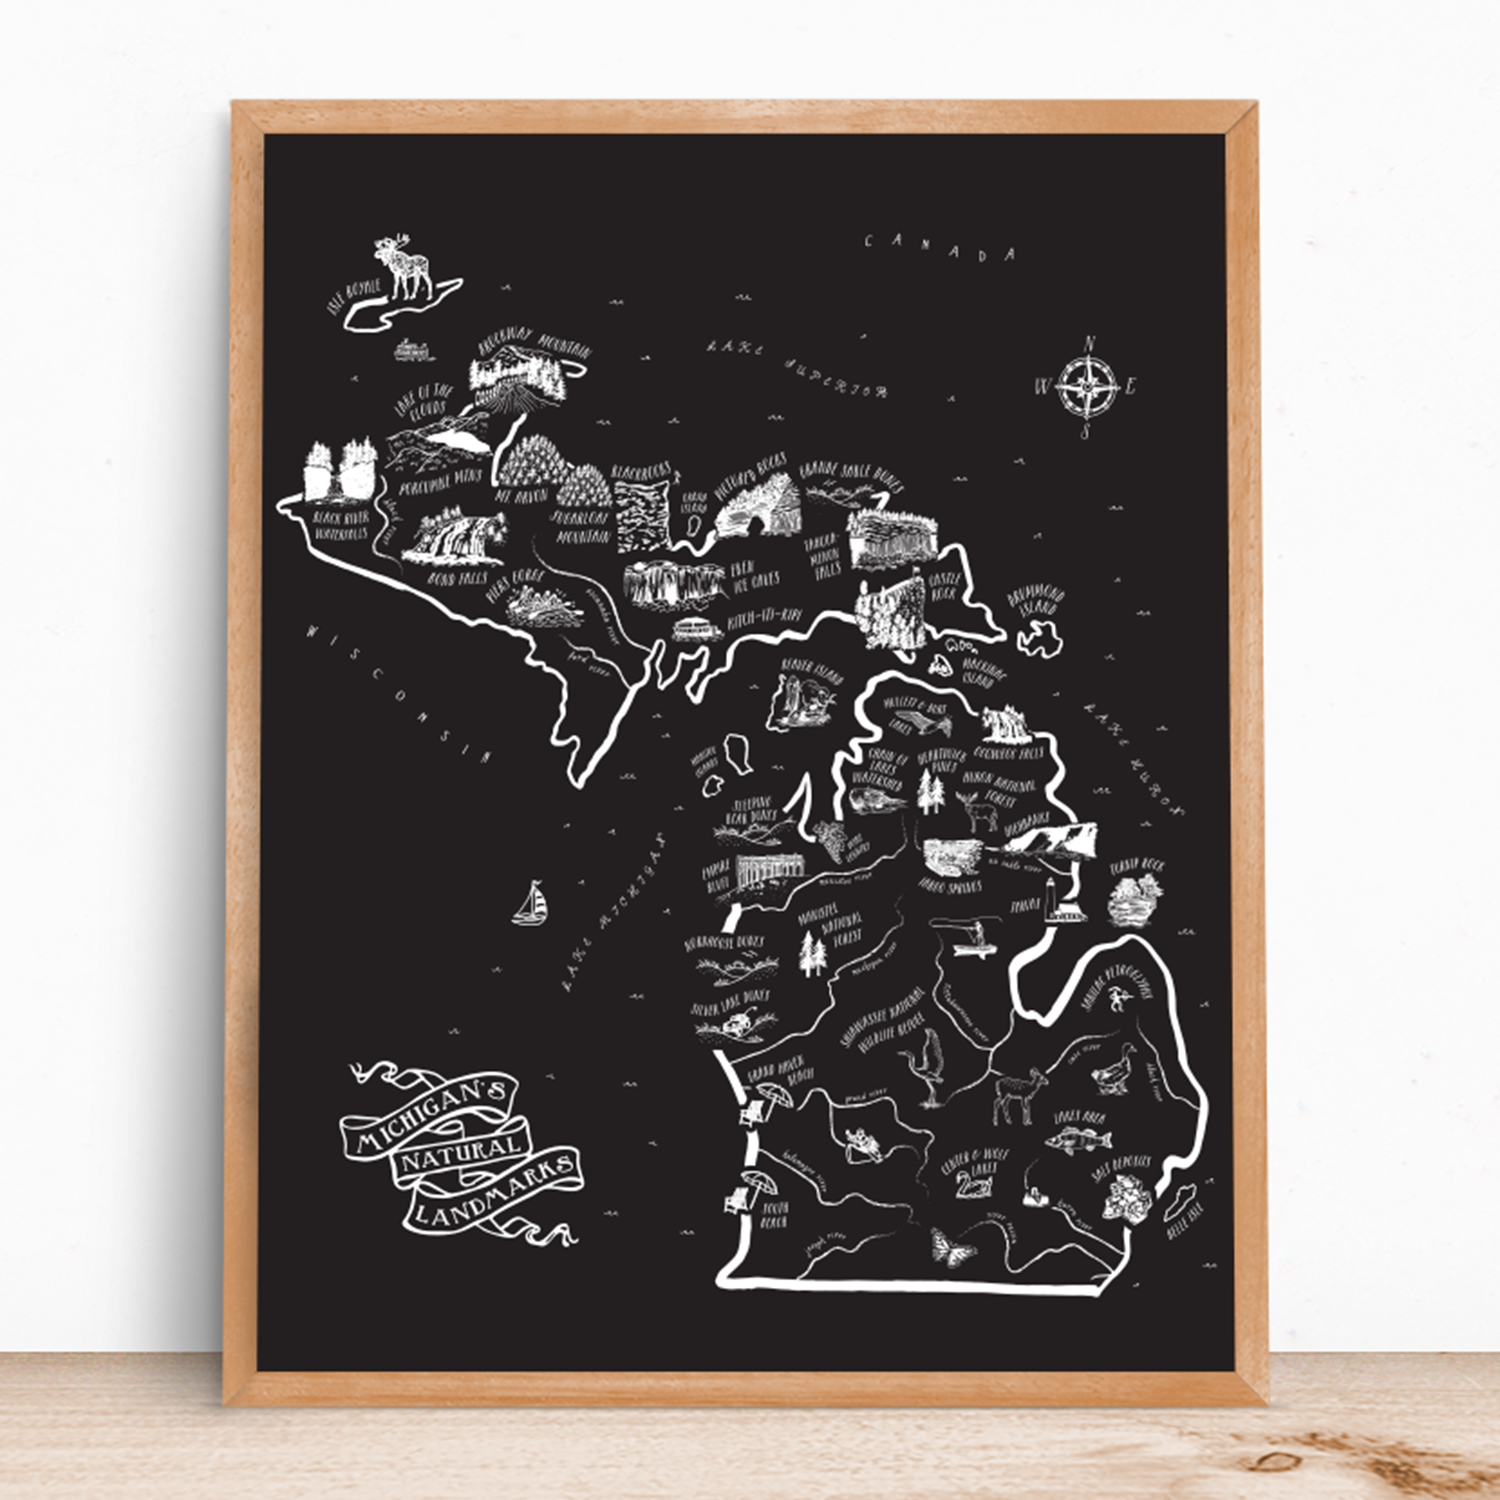 Michigan's Natural Landmarks Map screen print by Party of One.